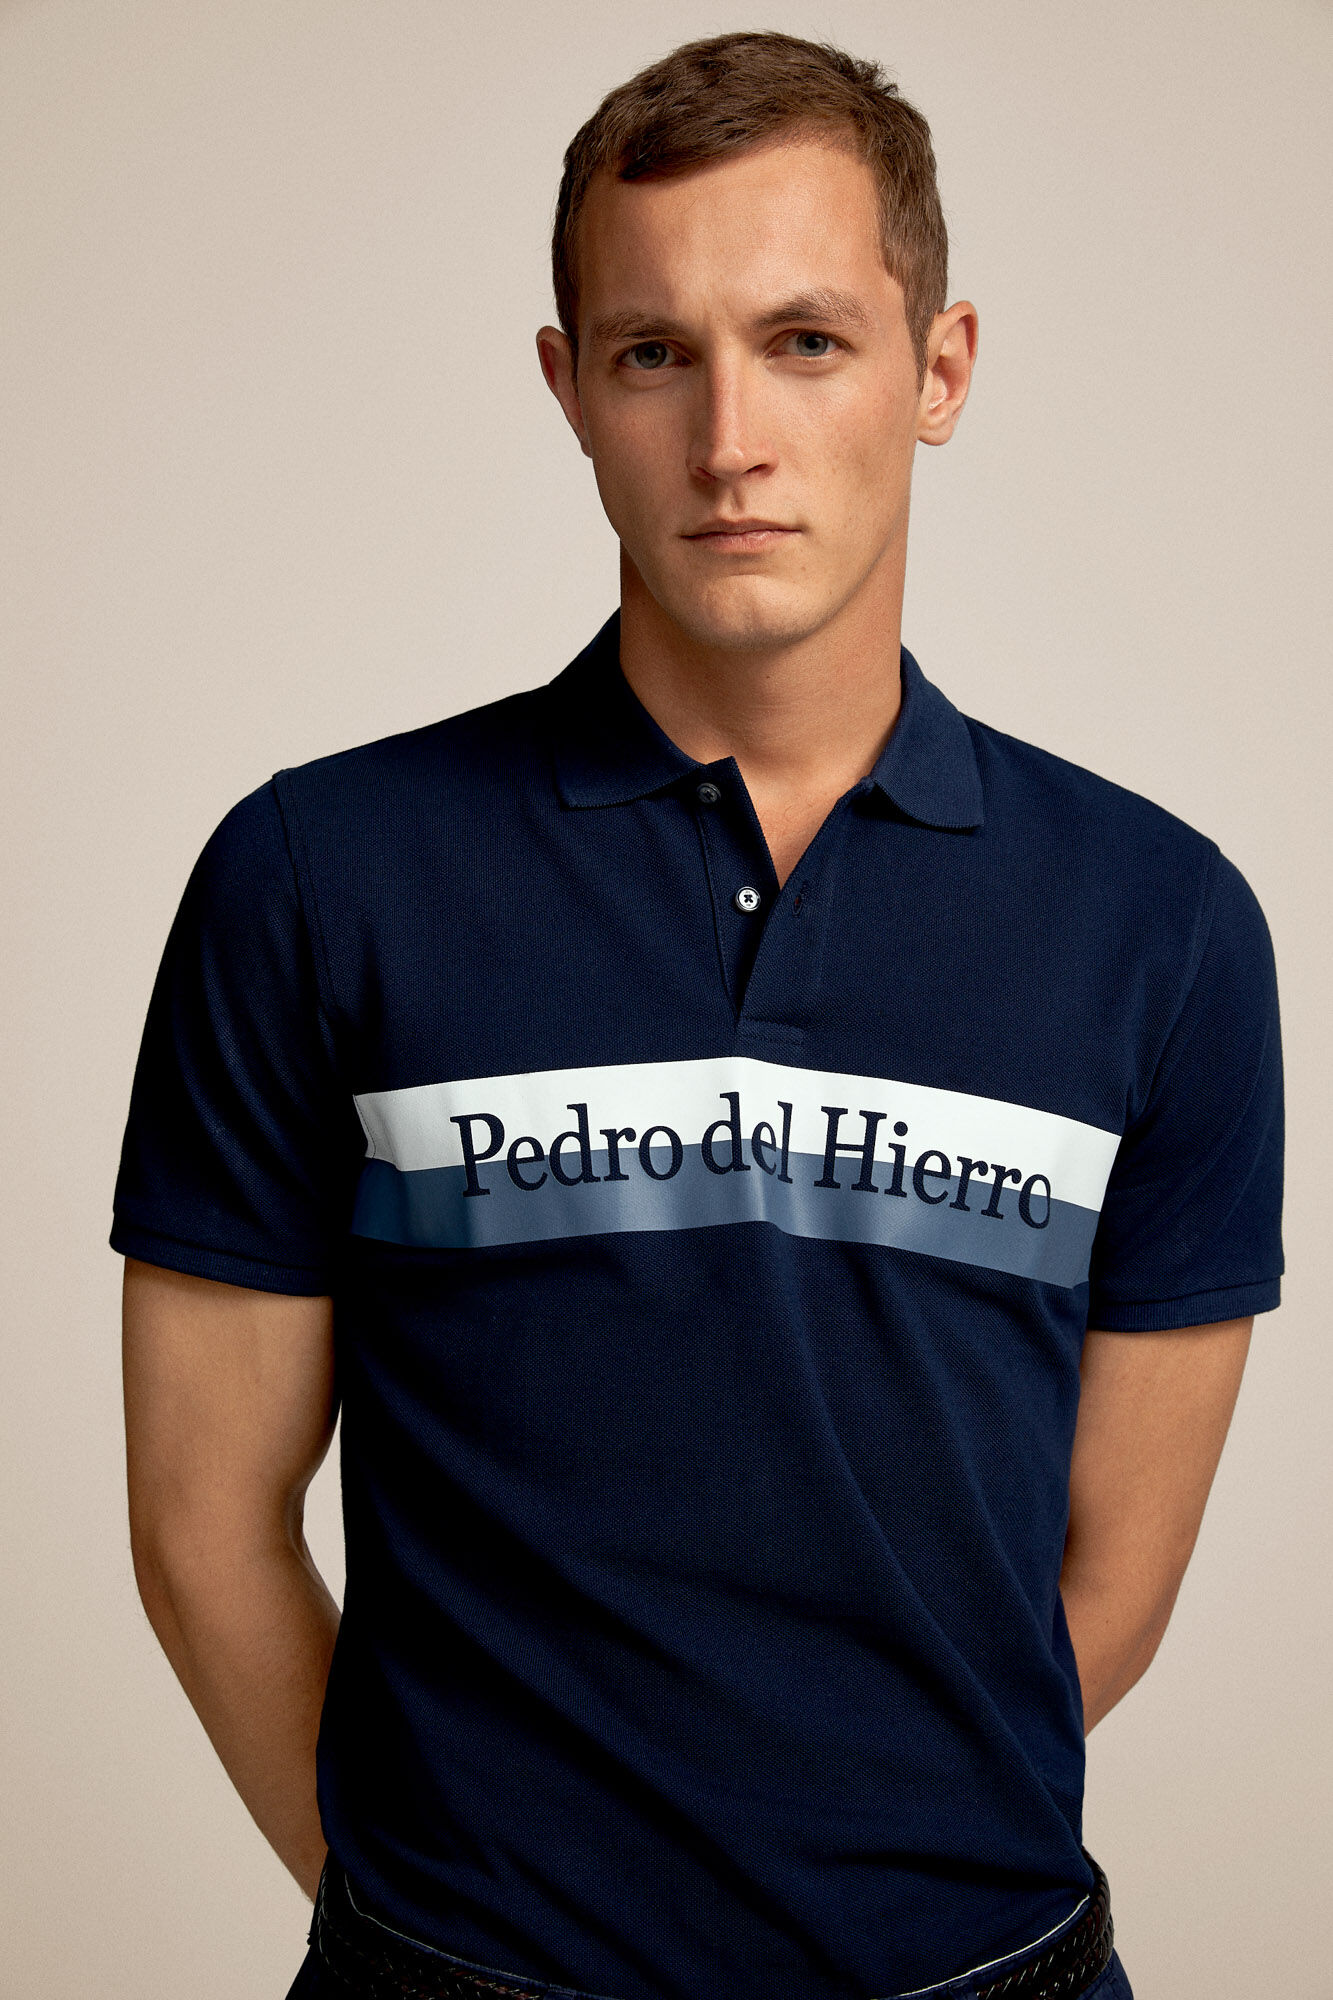 Polo Pedro Hierro Top Sellers, SAVE 55%.